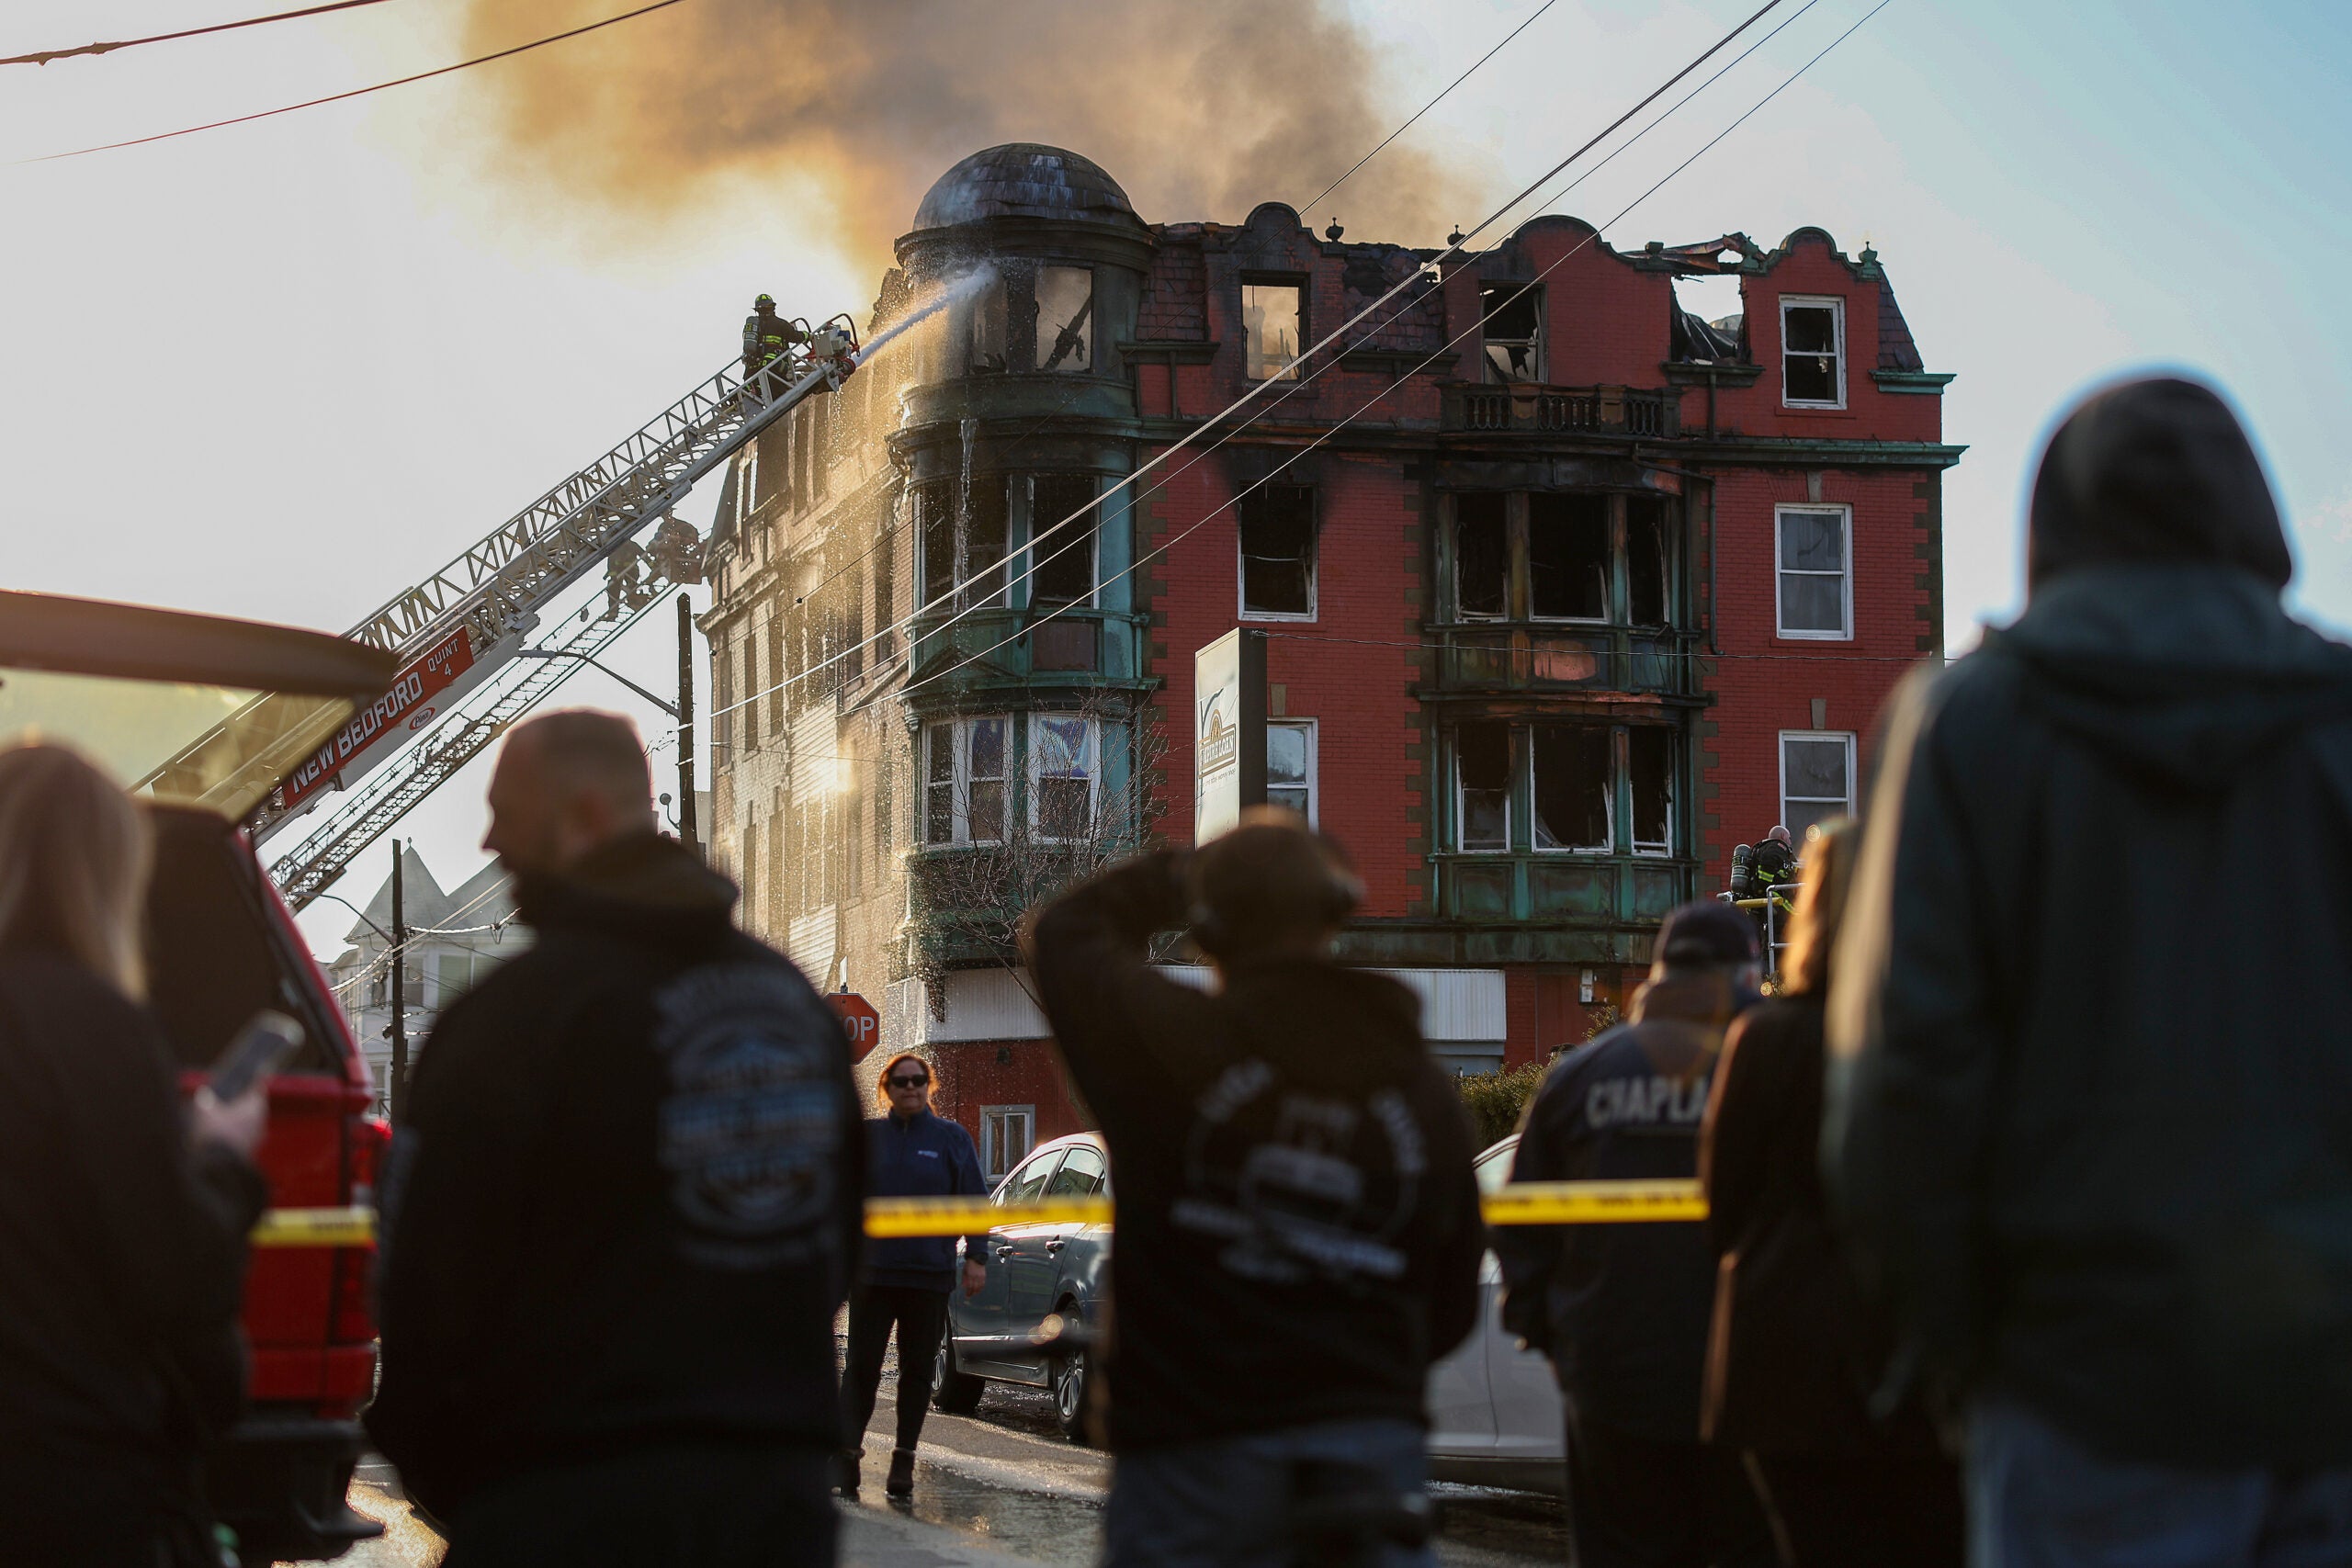 Several people look at the Royal Crown Lodging, a New Bedford rooming house that erupted in flames.